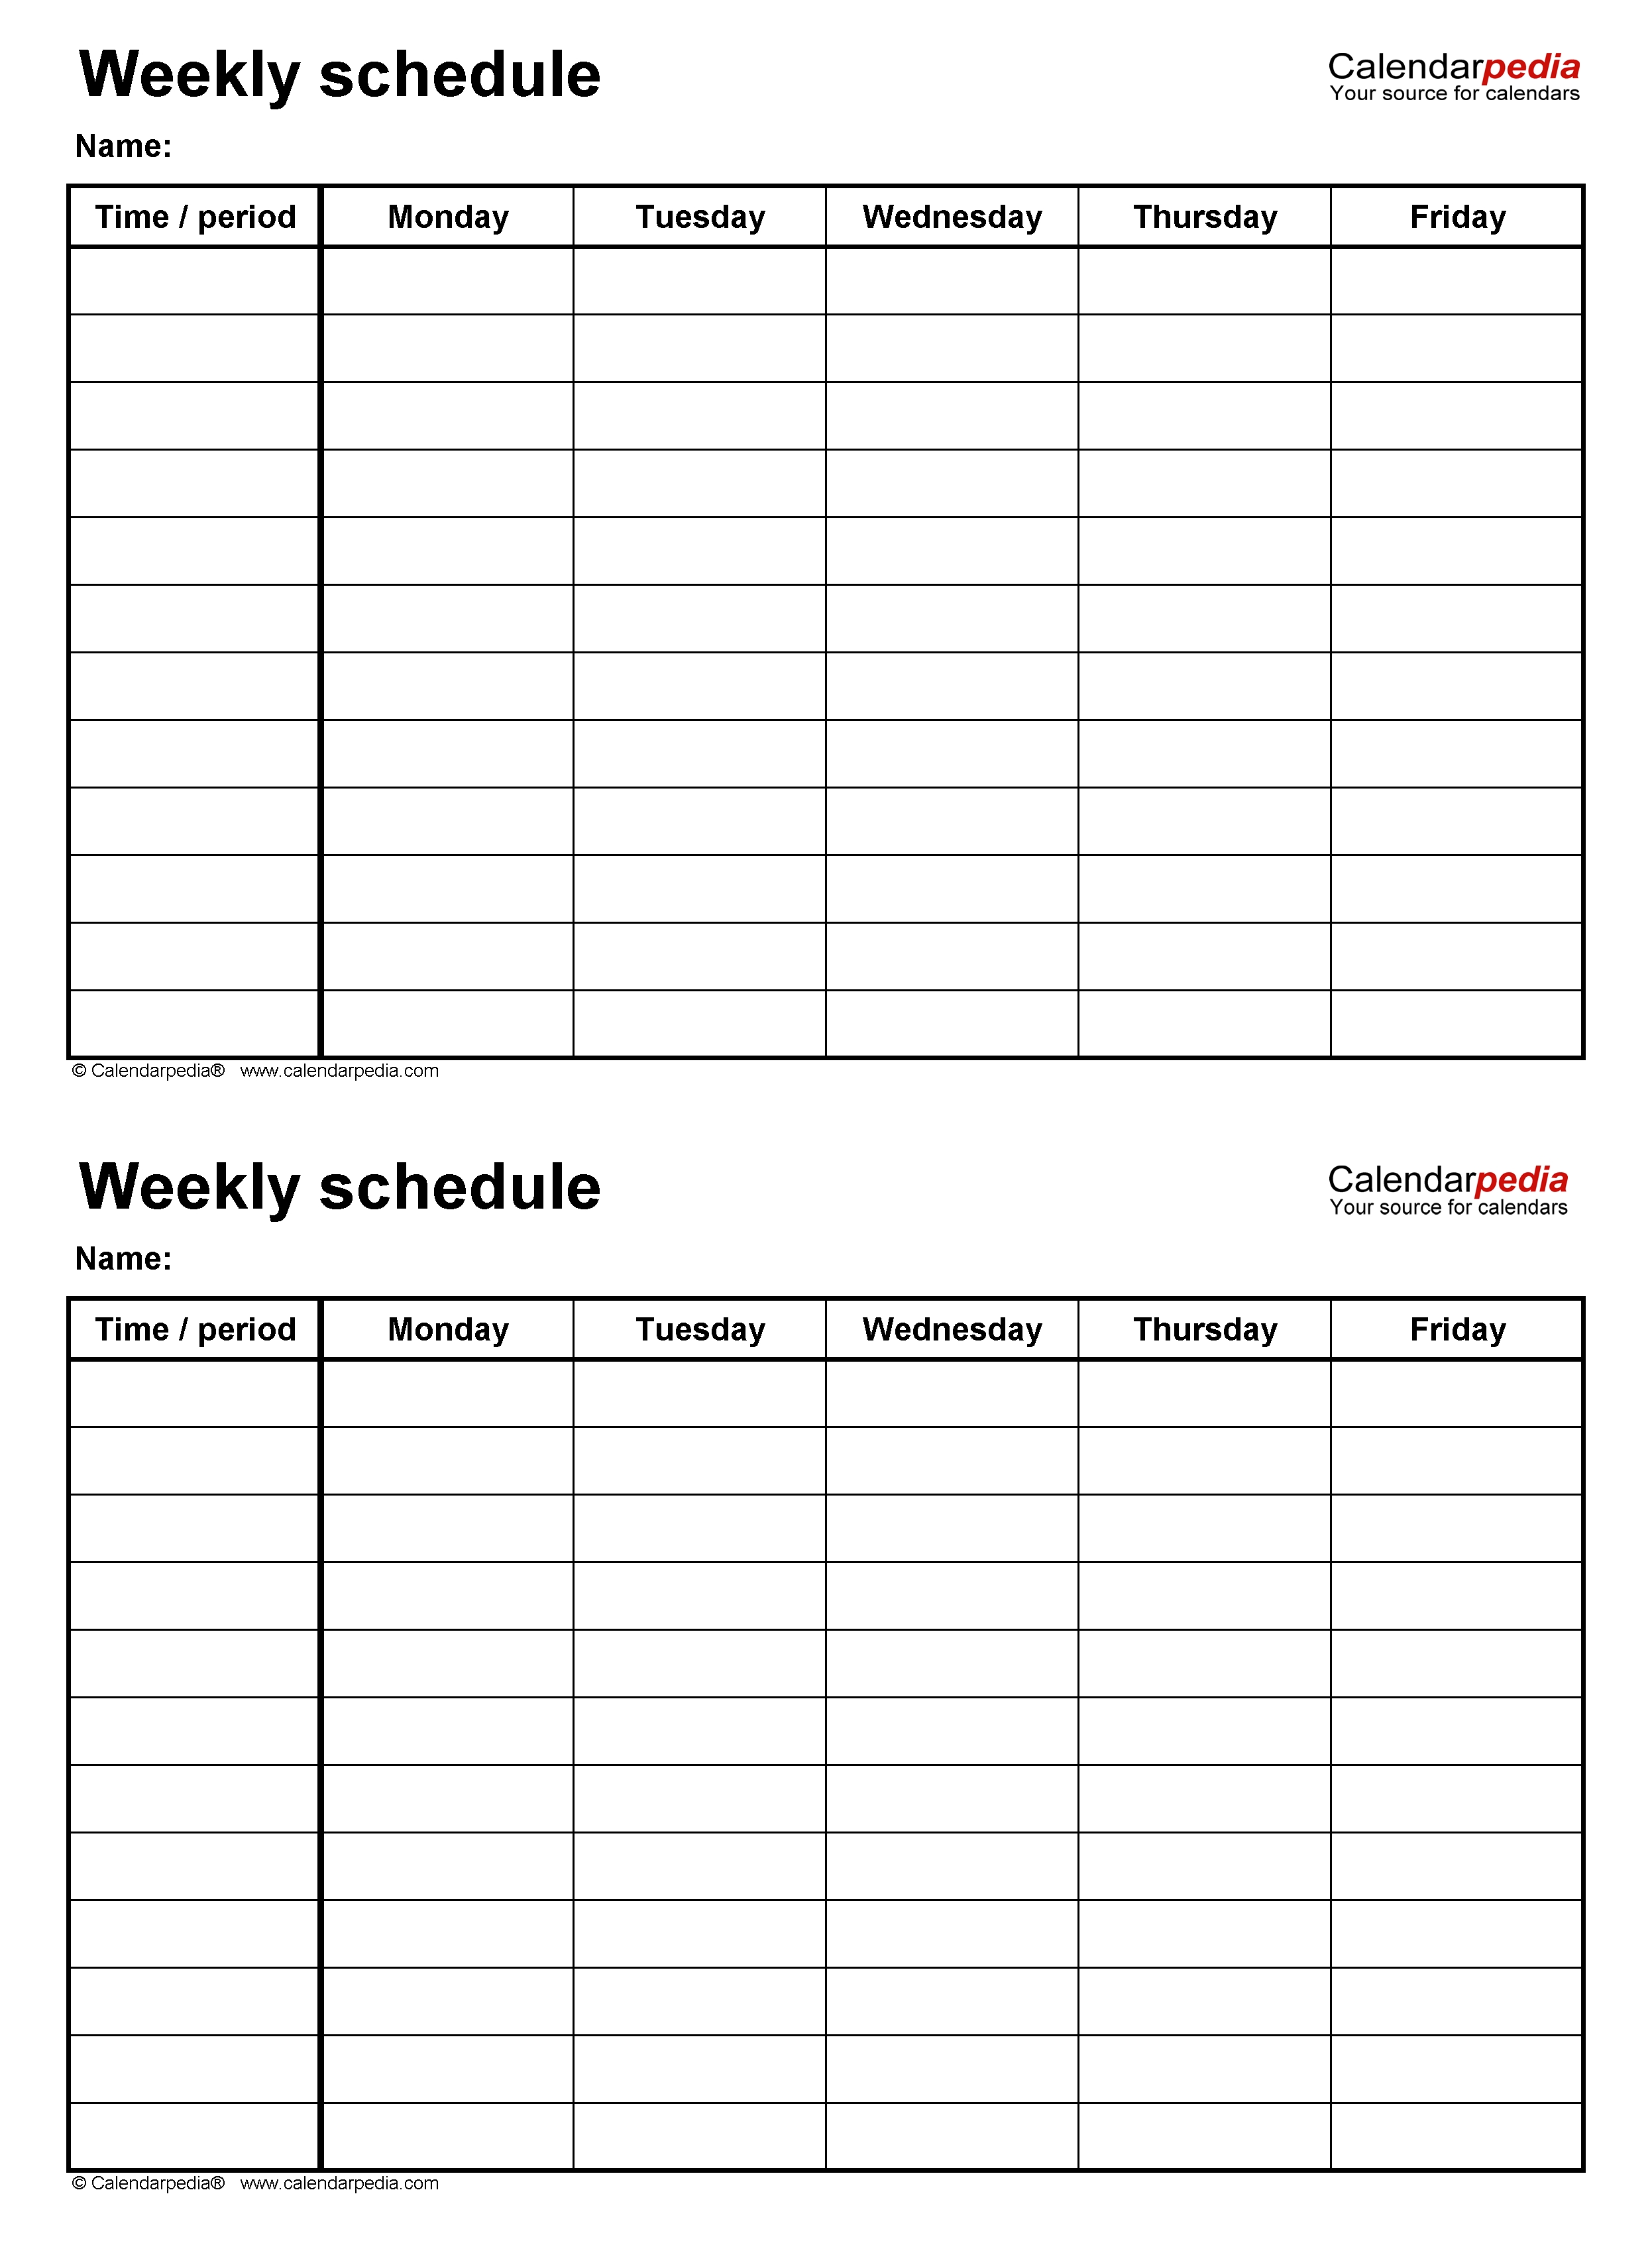 Free Weekly Schedule Templates For Excel - 18 Templates